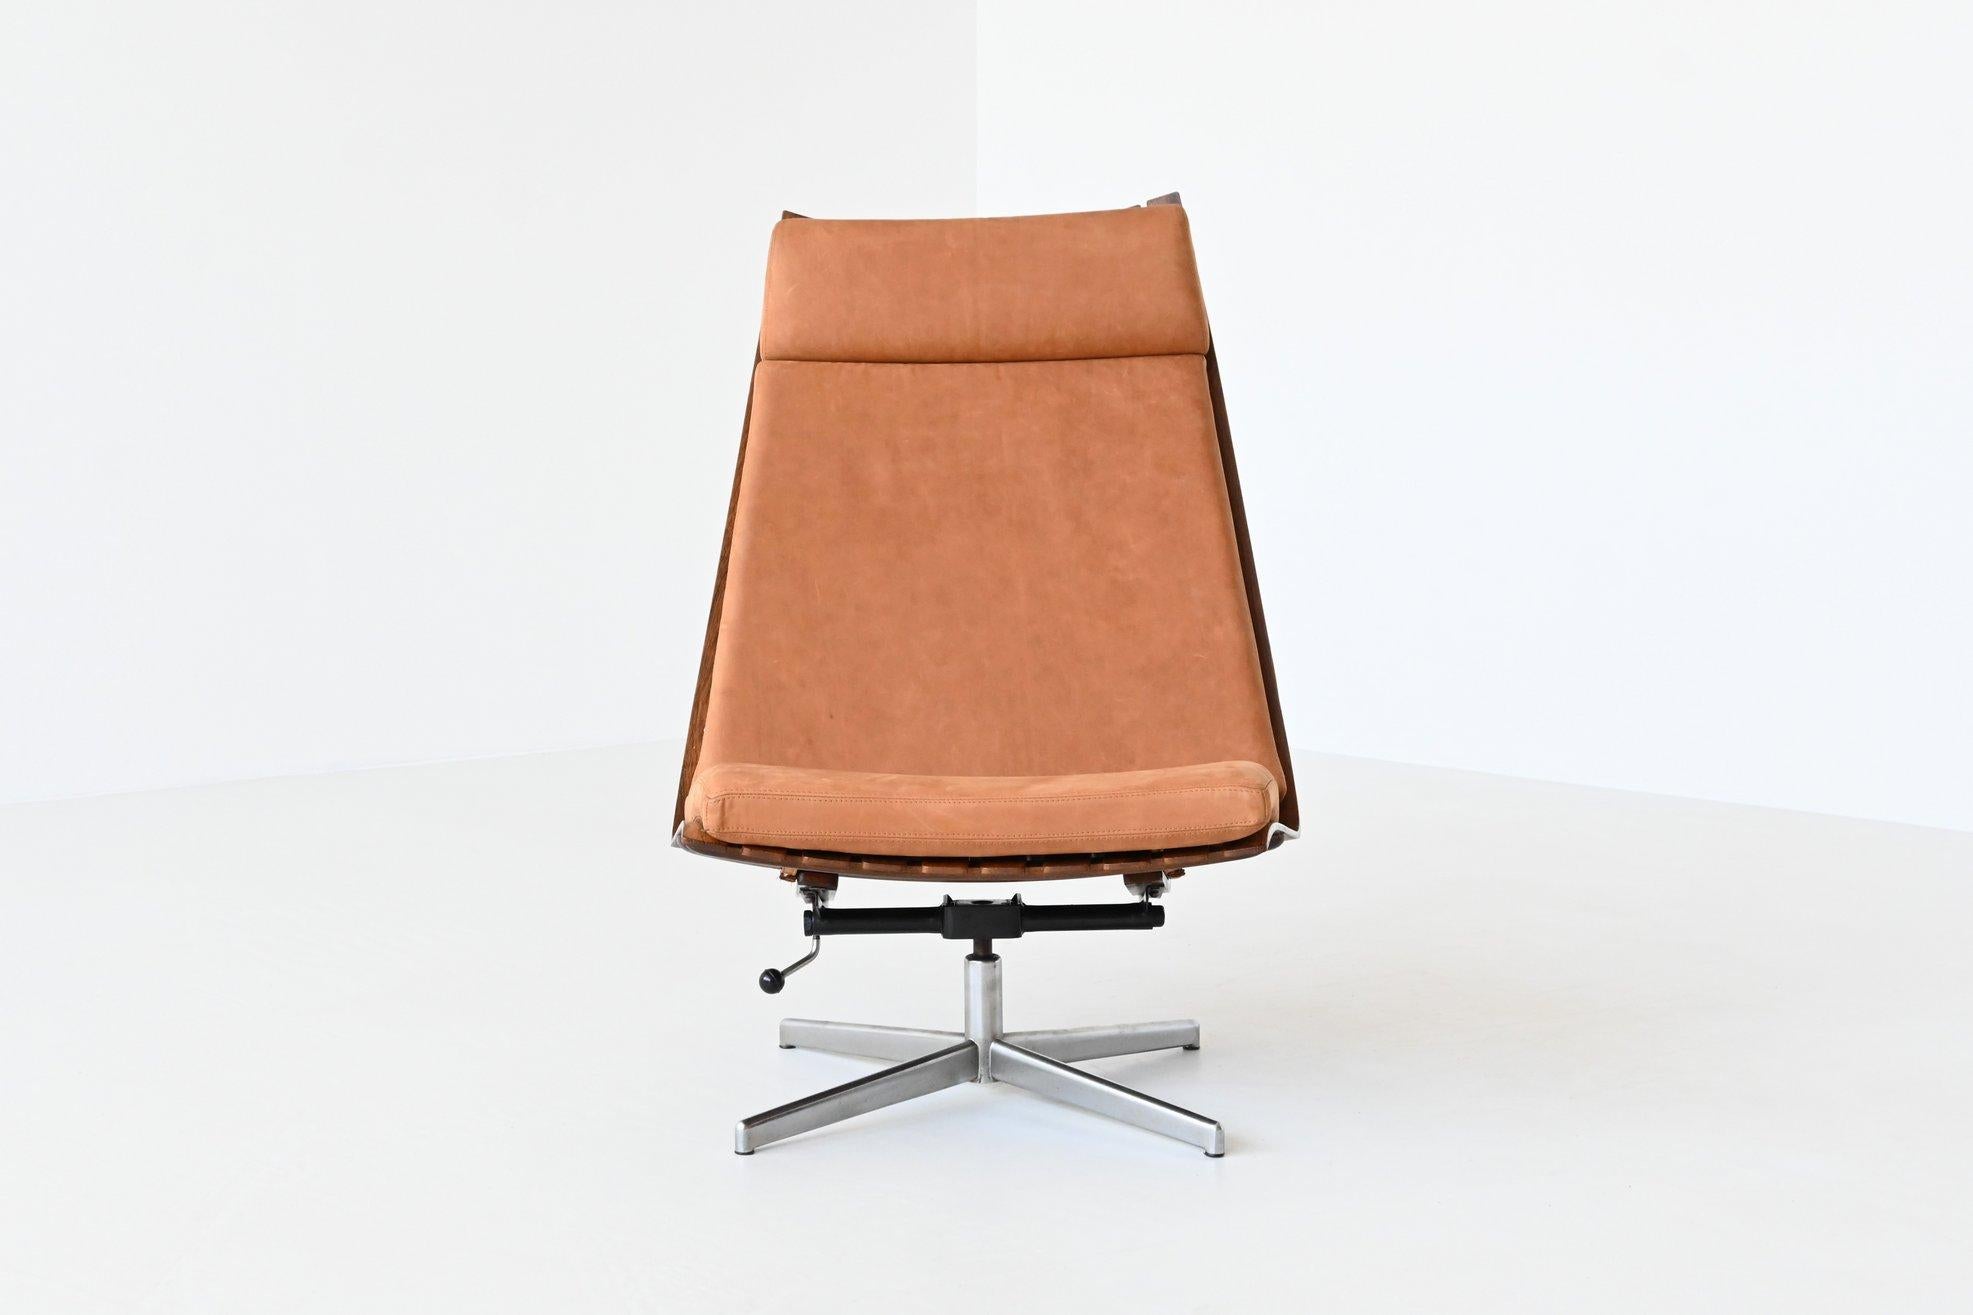 Fantastic sculptural high back swivel lounge chair designed by Hans Brattrud for Hove Mobler, Norway 1957. This amazing lounge chair is completely restored and a leather expert created a fitting, new cushion and headrest in a high quality, natural